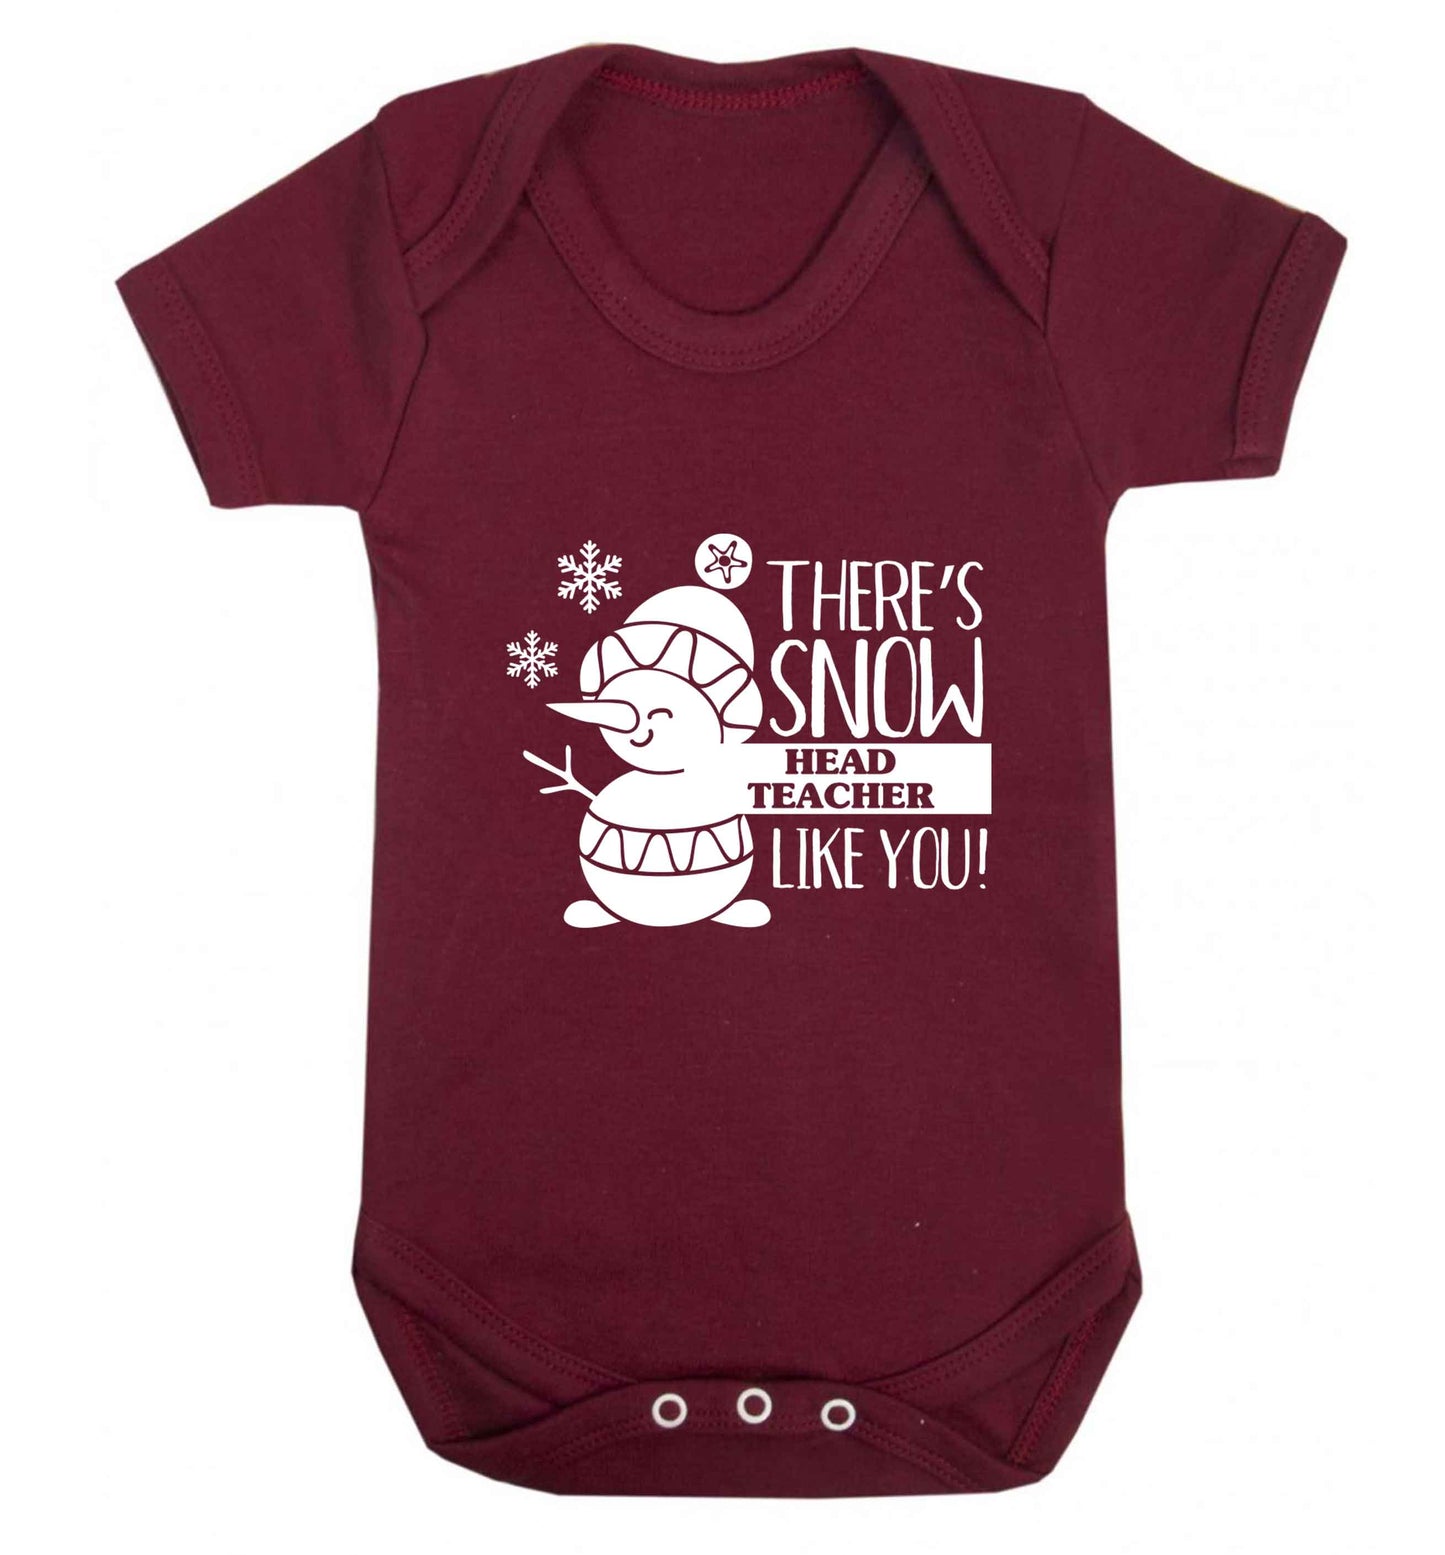 There's snow head teacher like you baby vest maroon 18-24 months